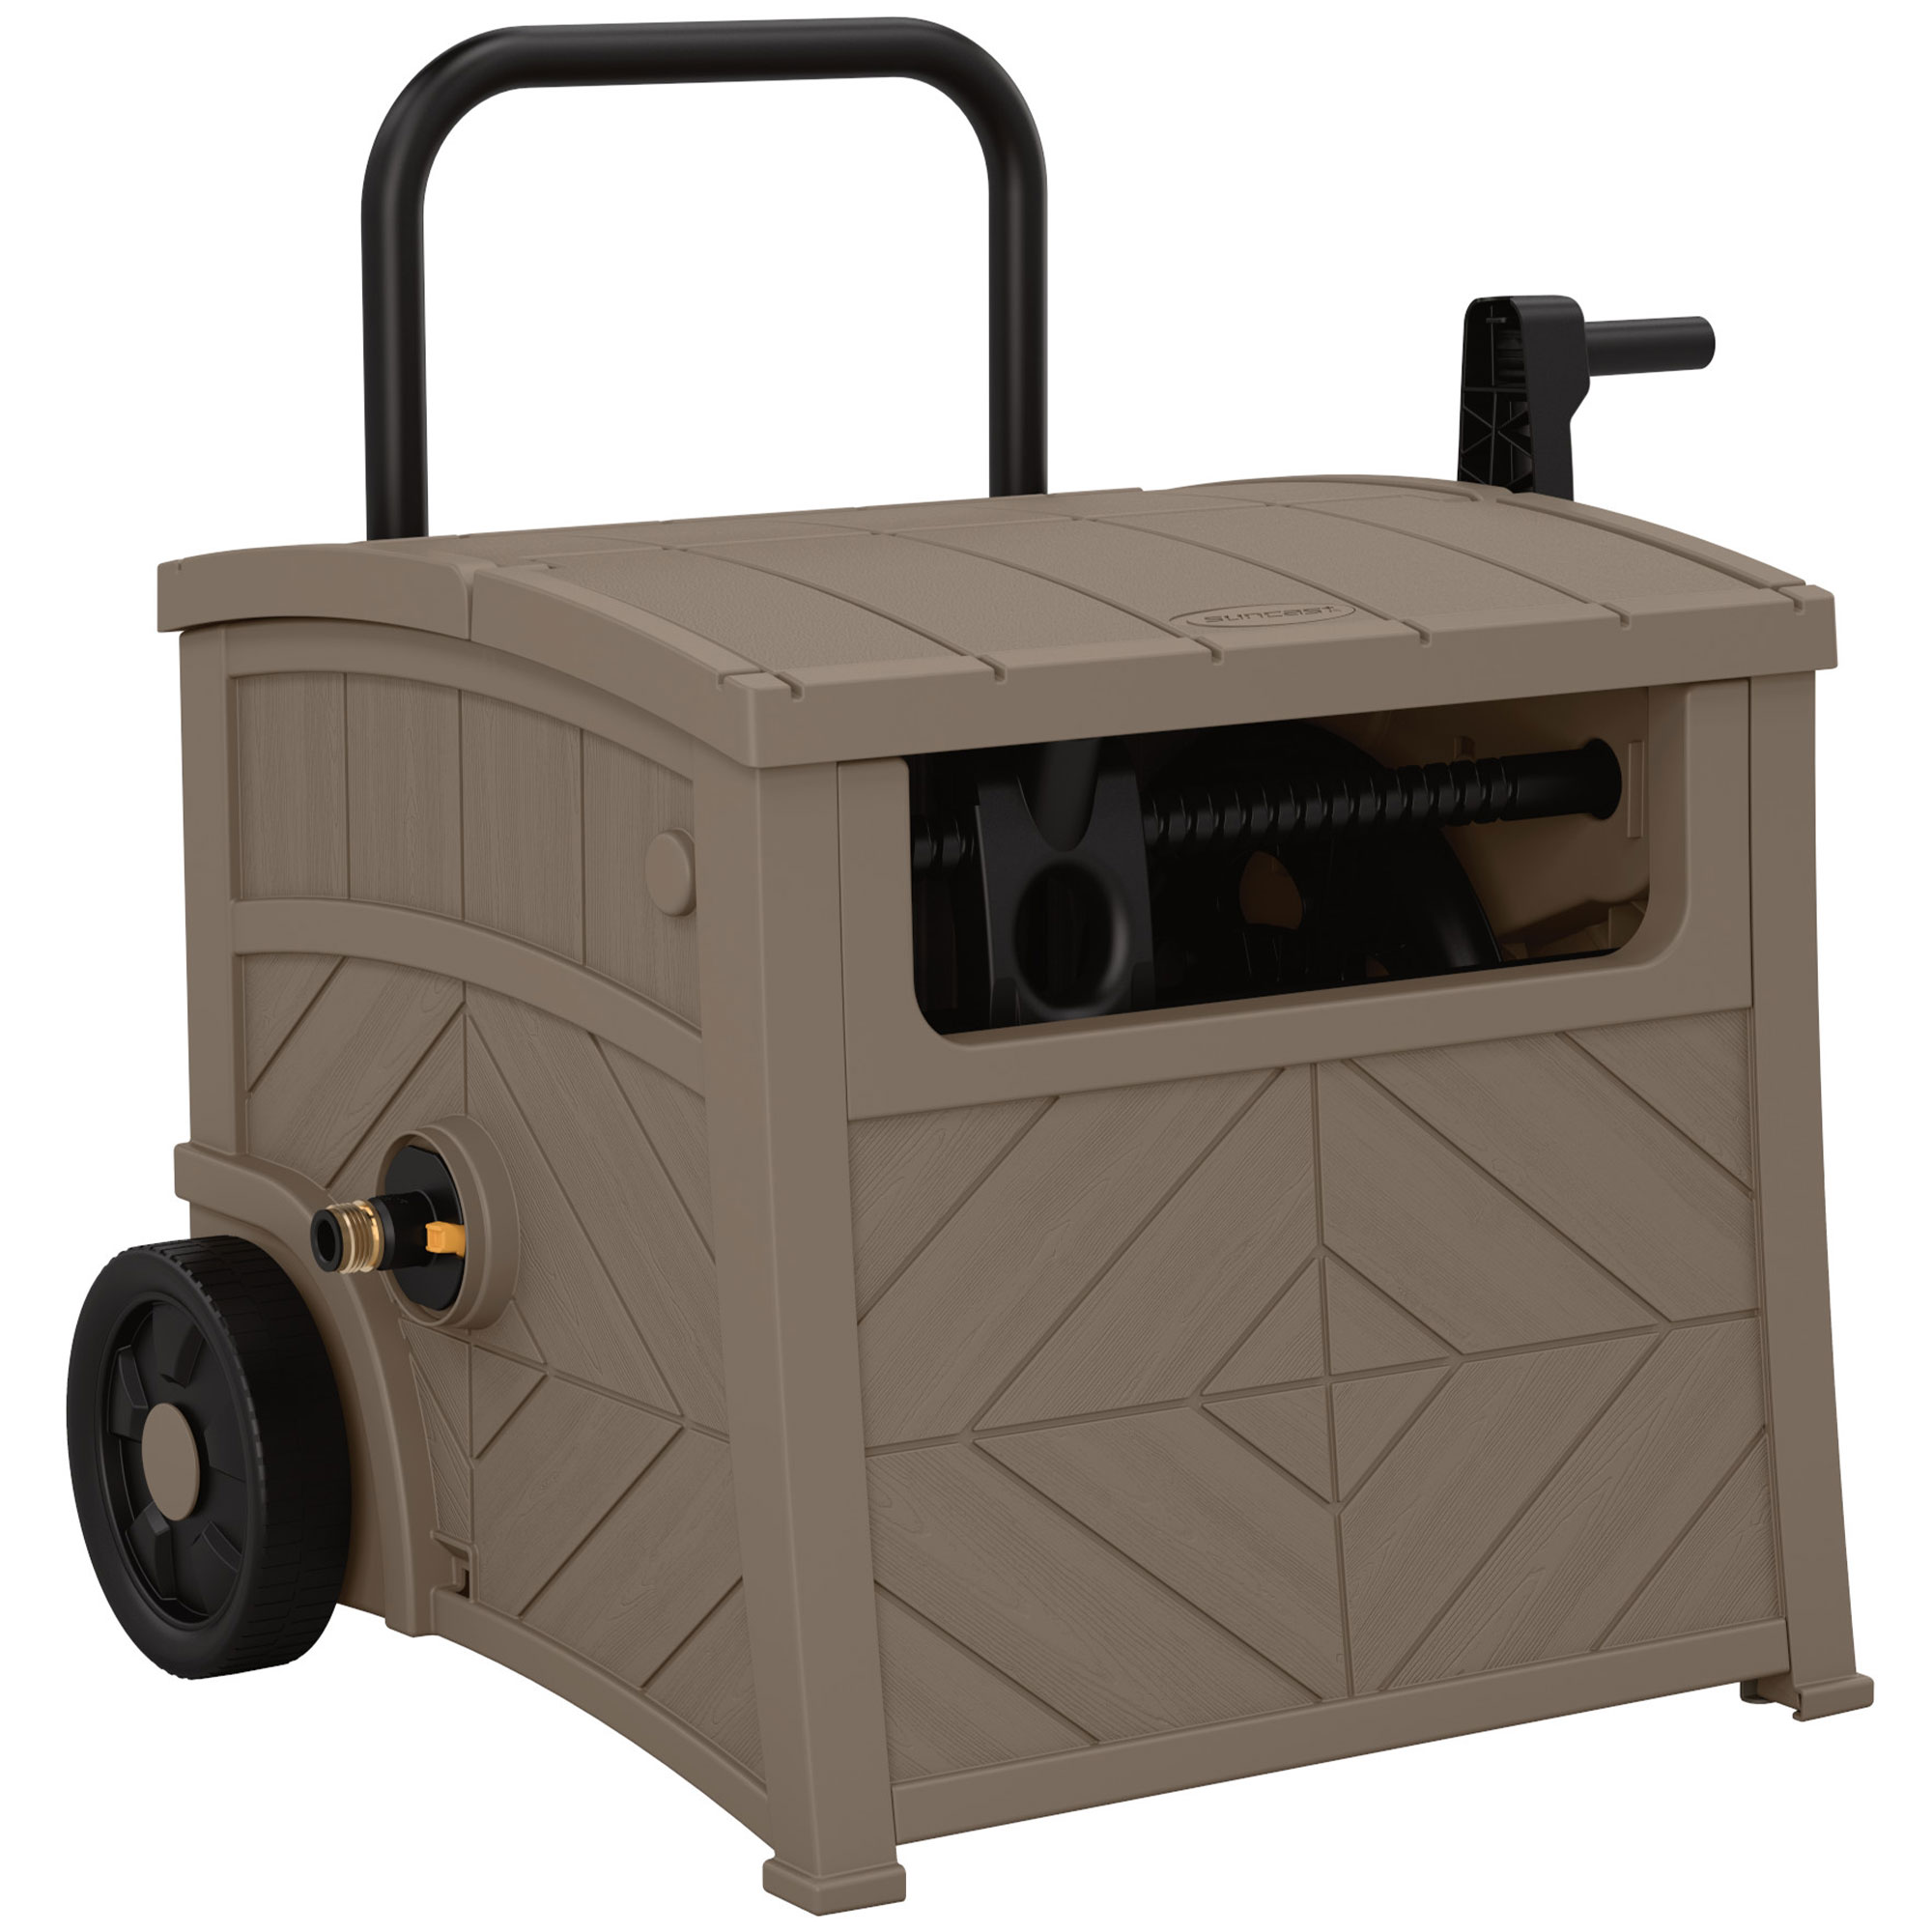 Suncast WST150 Free Standing Hideaway Hose Reel, Taupe, Hose 150' - image 1 of 7